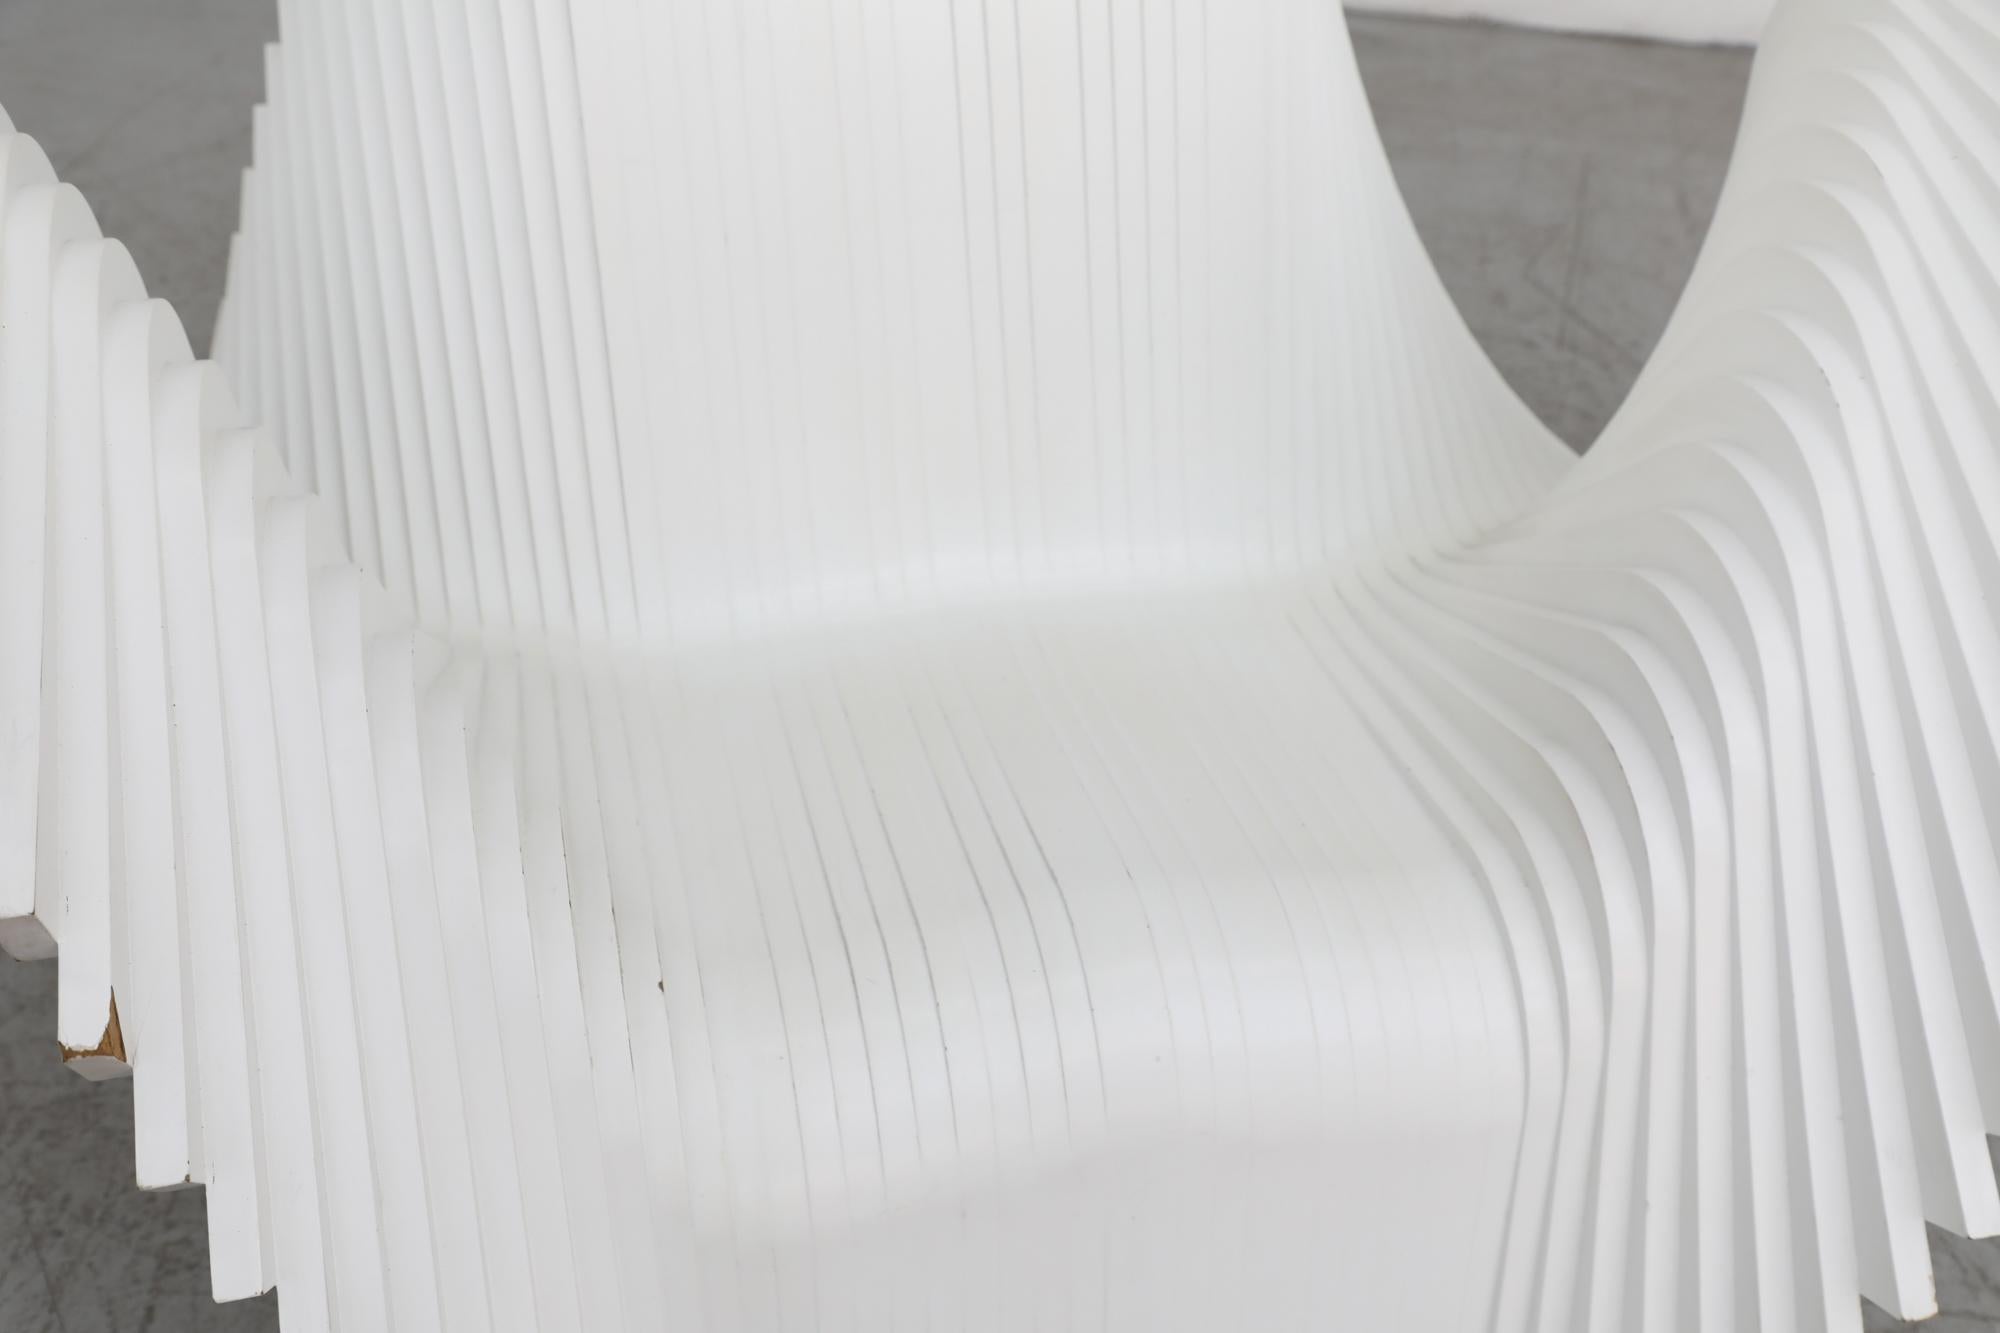 Marilyn Monroe Style Chair Inspired by Alexander White 8